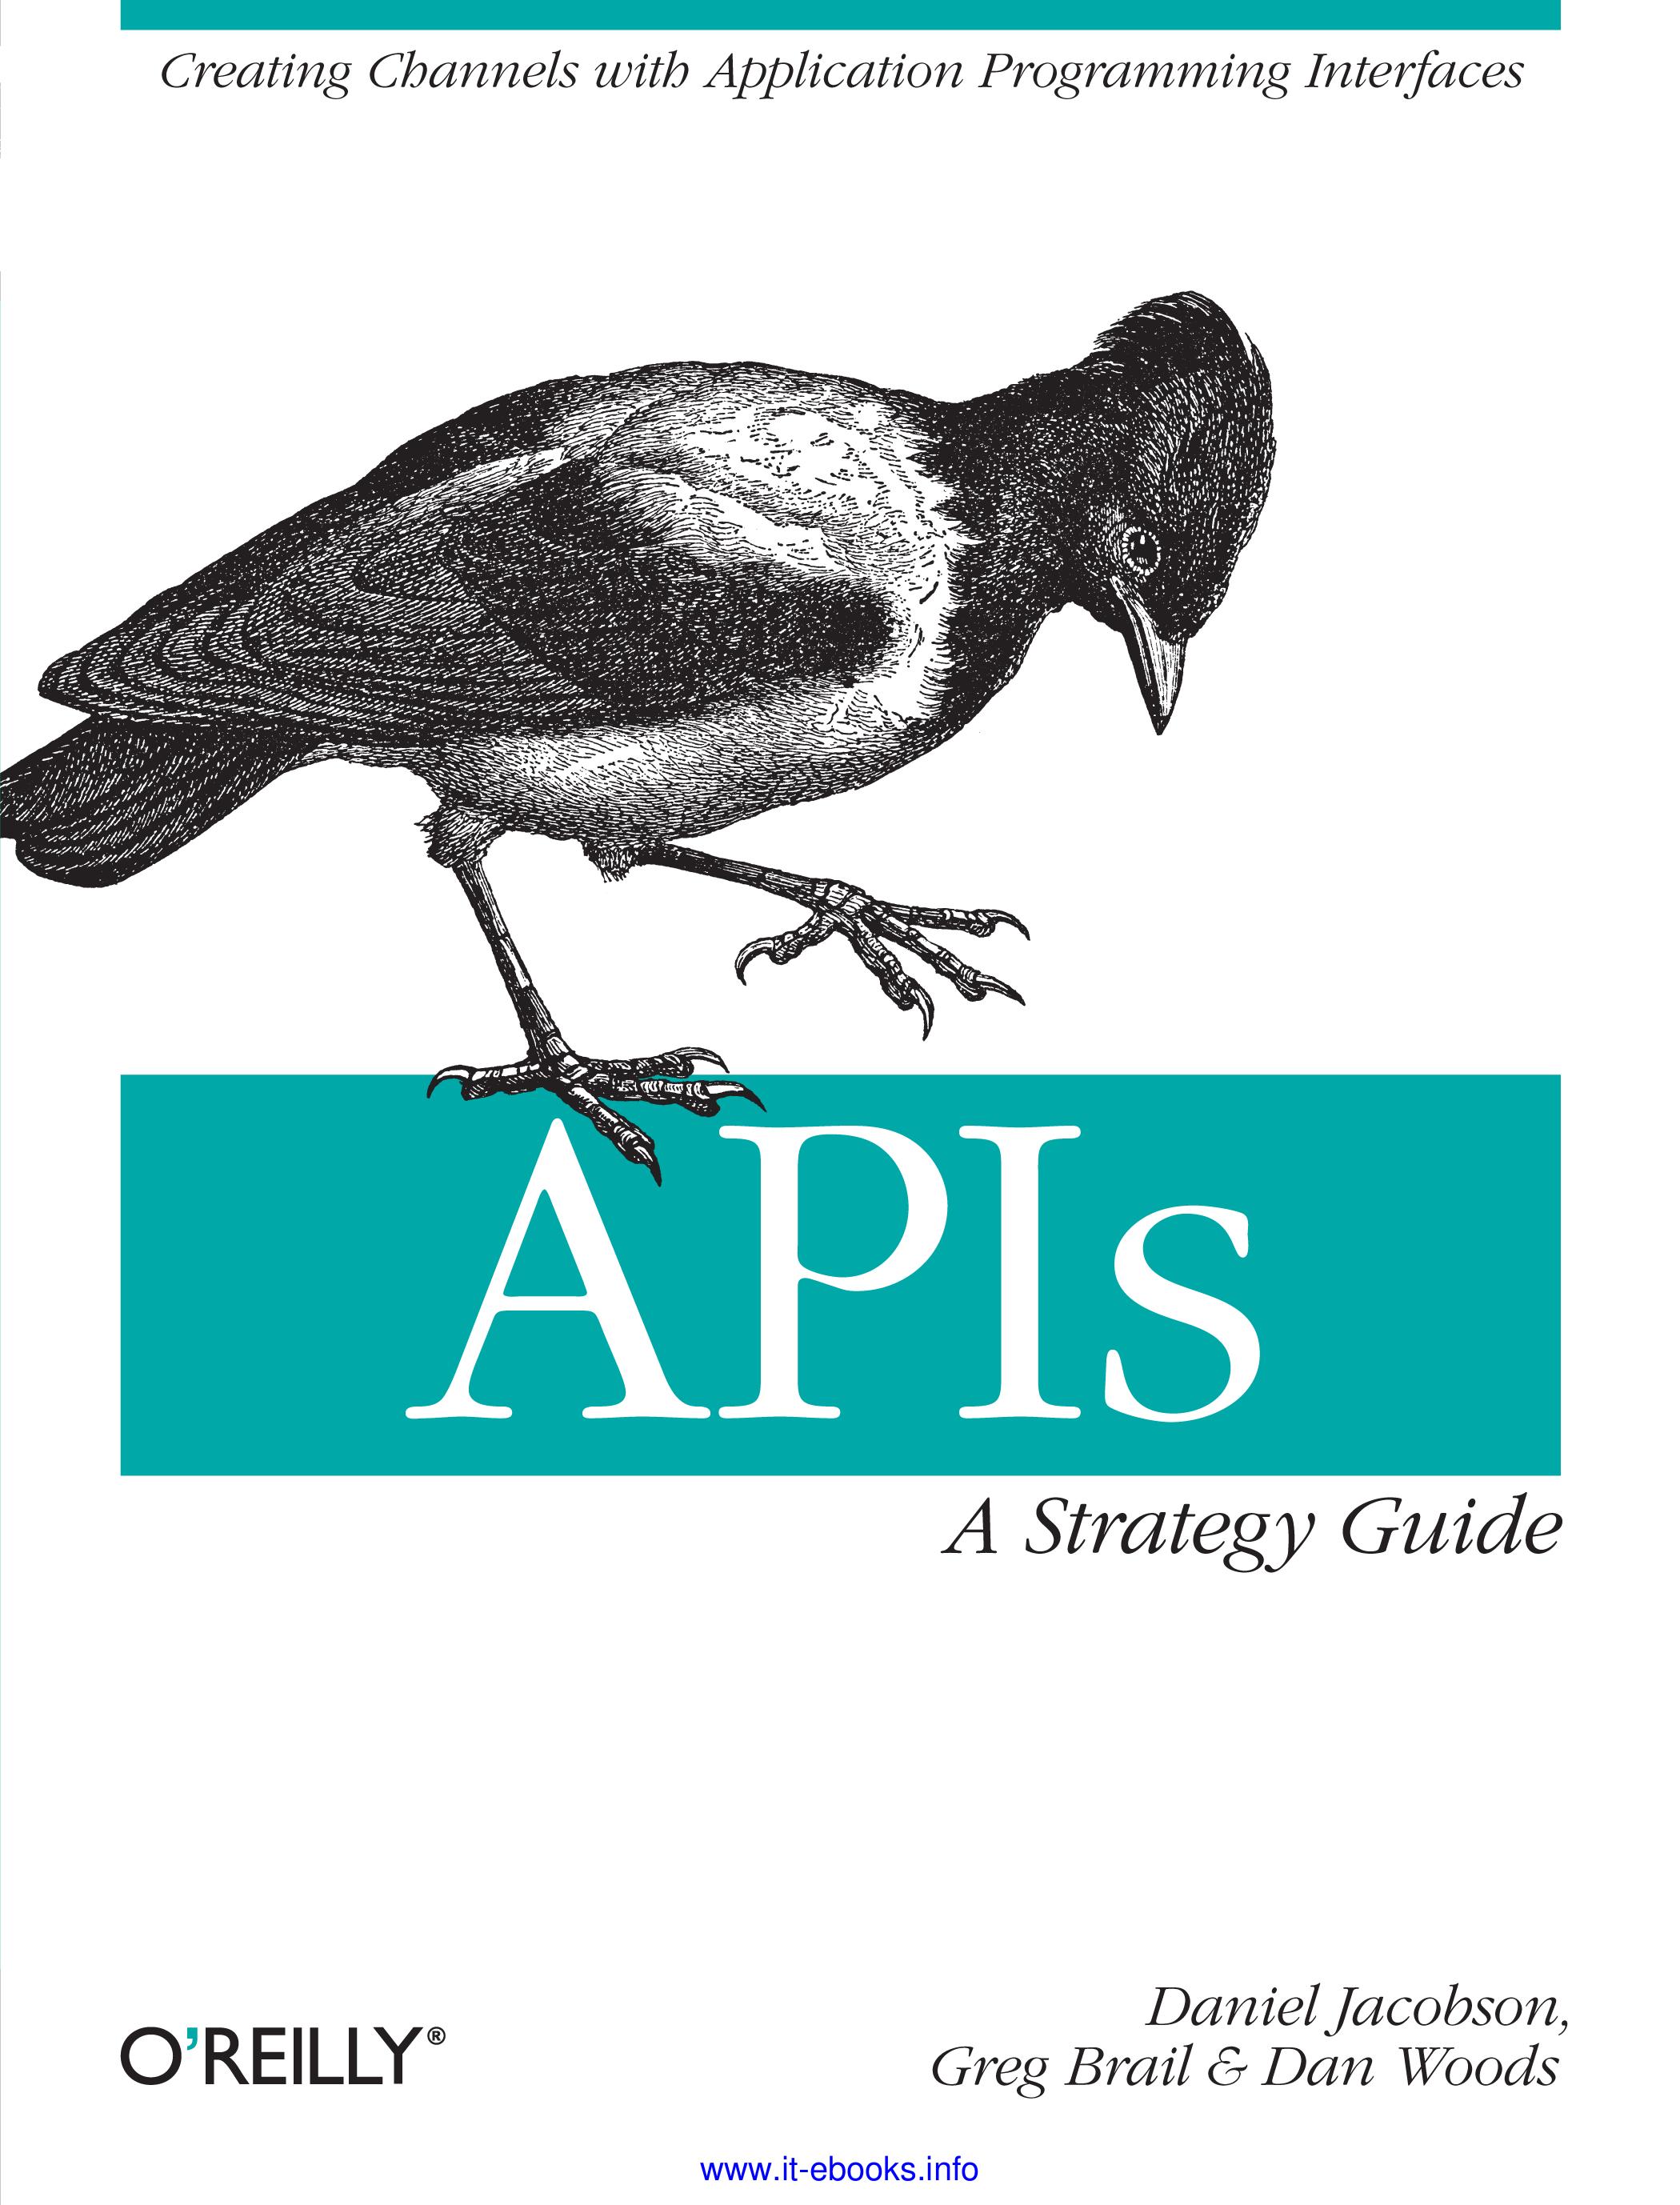 APIs: A Strategy Guide - Daniel Jacobson, Greg Brail, and Dan Woods